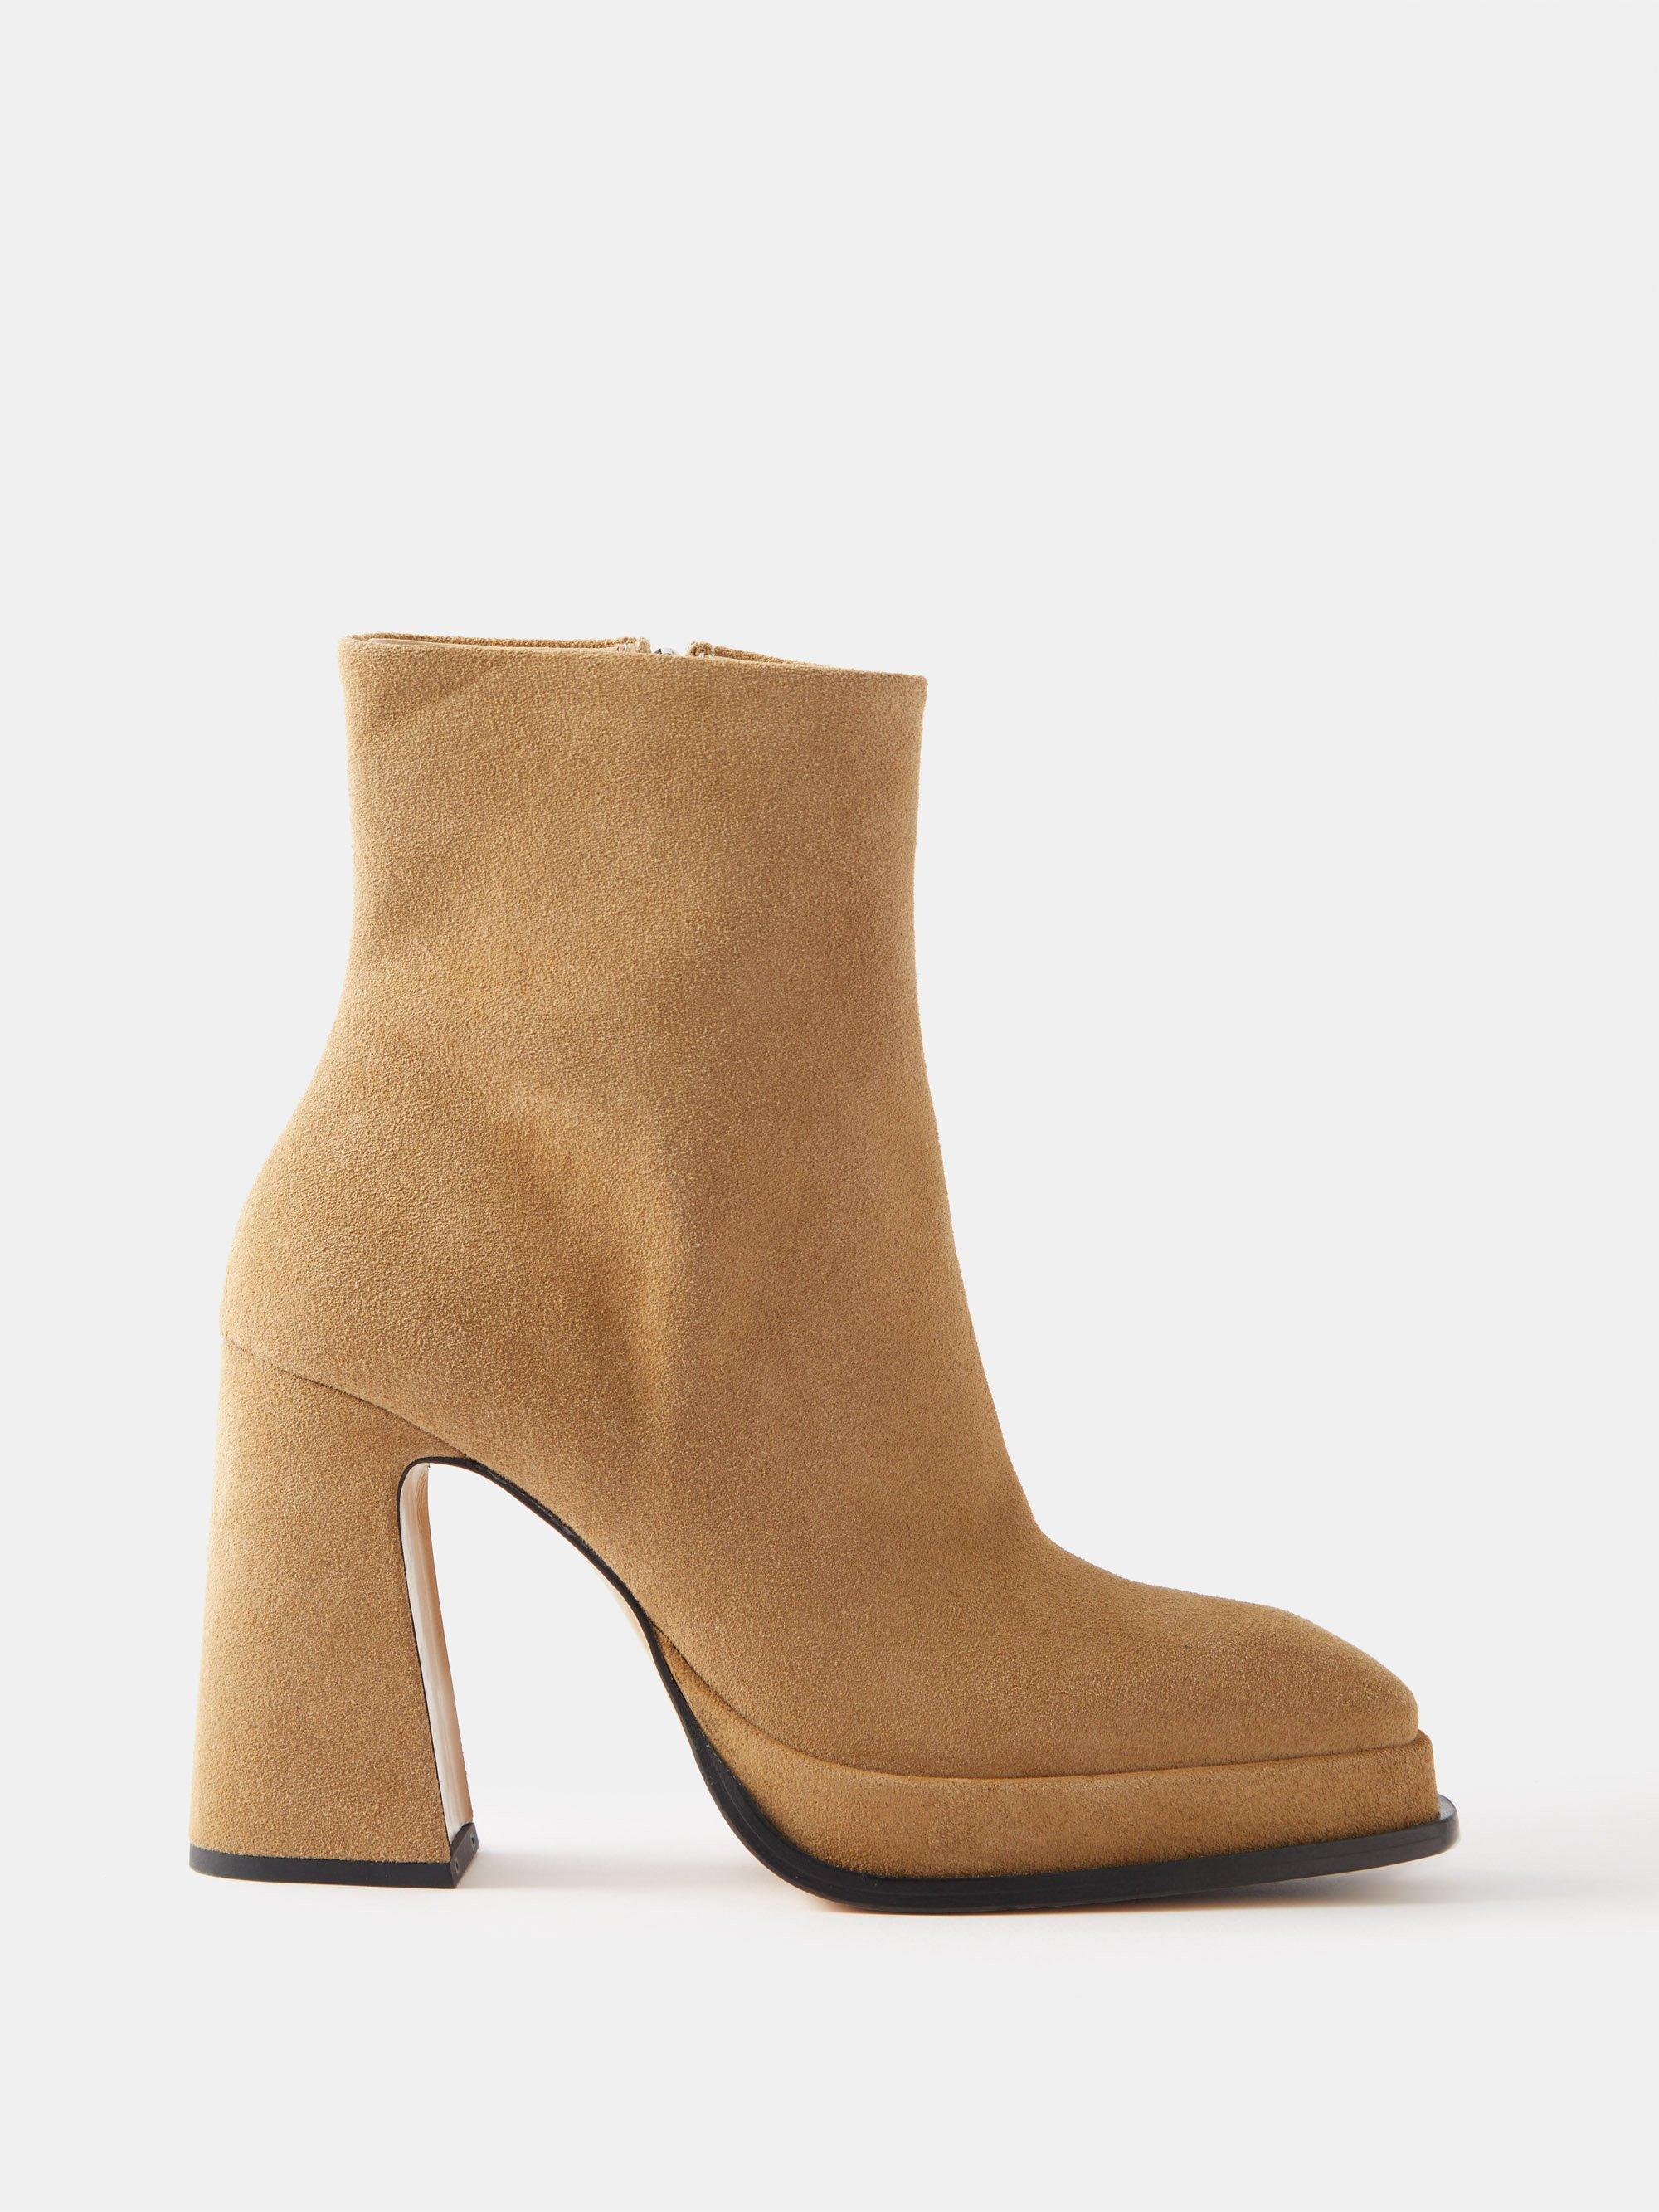 Souliers Martinez Chueca 90 Suede Platform Boots in White | Lyst